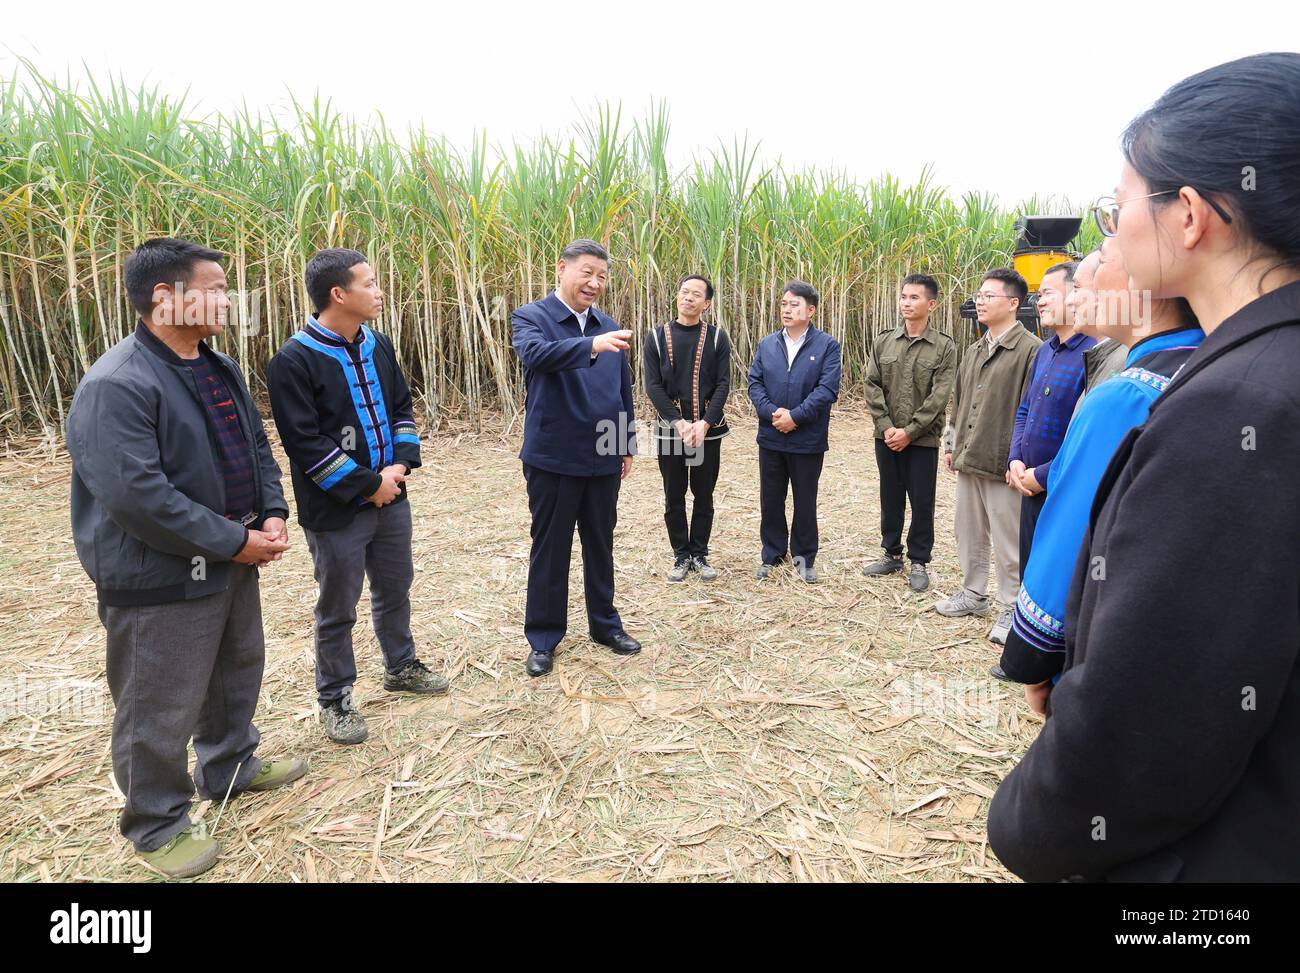 (231215) -- NANNING, Dec. 15, 2023 (Xinhua) -- Chinese President Xi Jinping, also general secretary of the Communist Party of China Central Committee and chairman of the Central Military Commission, inspects a sugarcane base in Laibin, south China's Guangxi Zhuang Autonomous Region, Dec. 14, 2023. Xi made an inspection tour to Guangxi Zhuang Autonomous Region from Thursday to Friday. (Xinhua/Wang Ye) Stock Photo